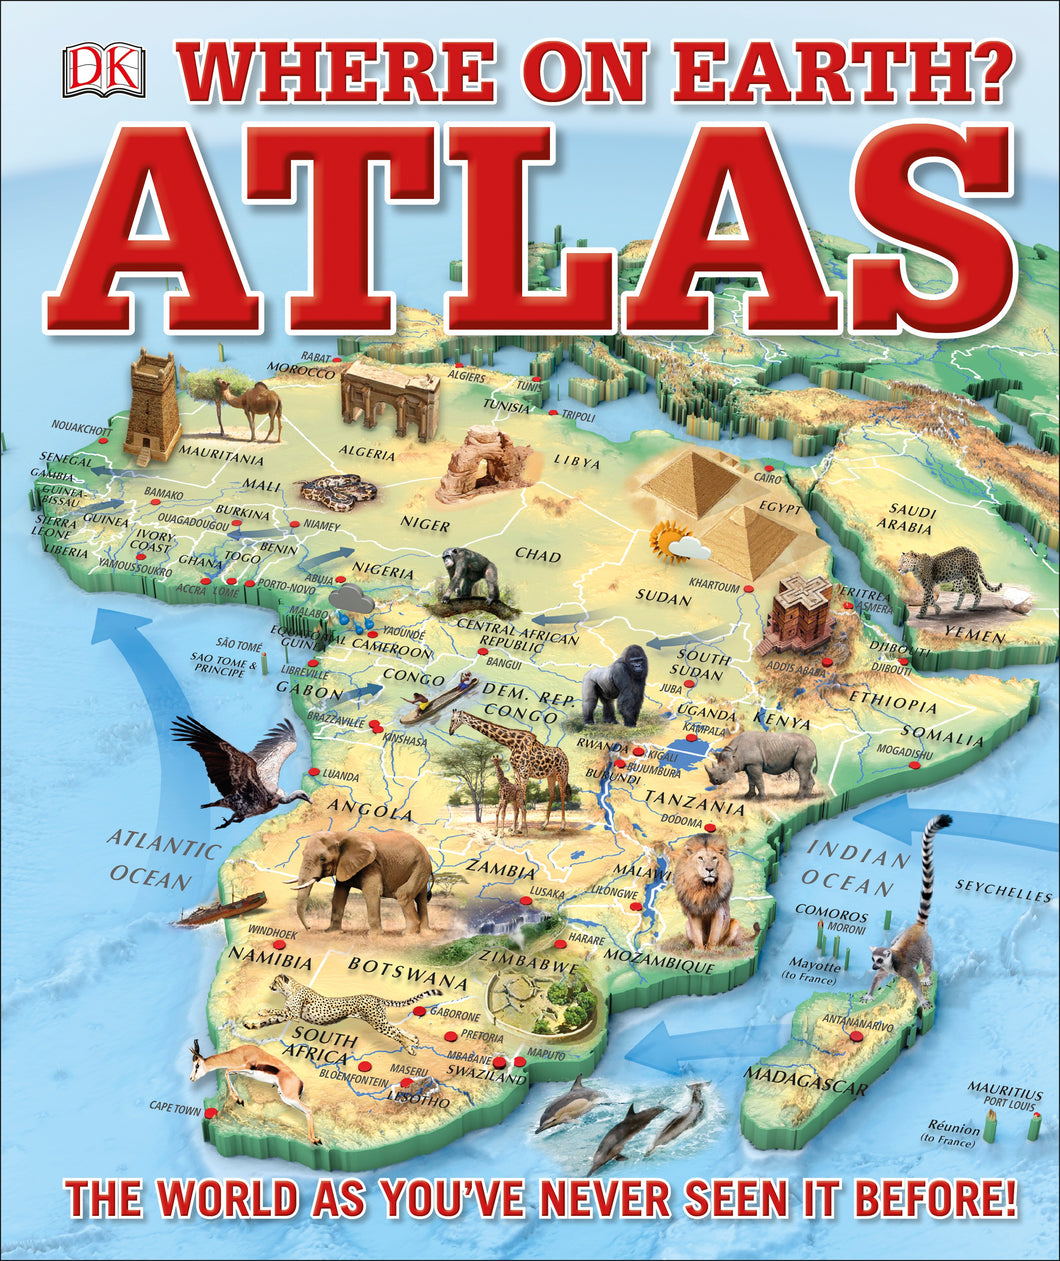 Where on Earth? Atlas : The World As You've Never Seen It Before - Things They Love